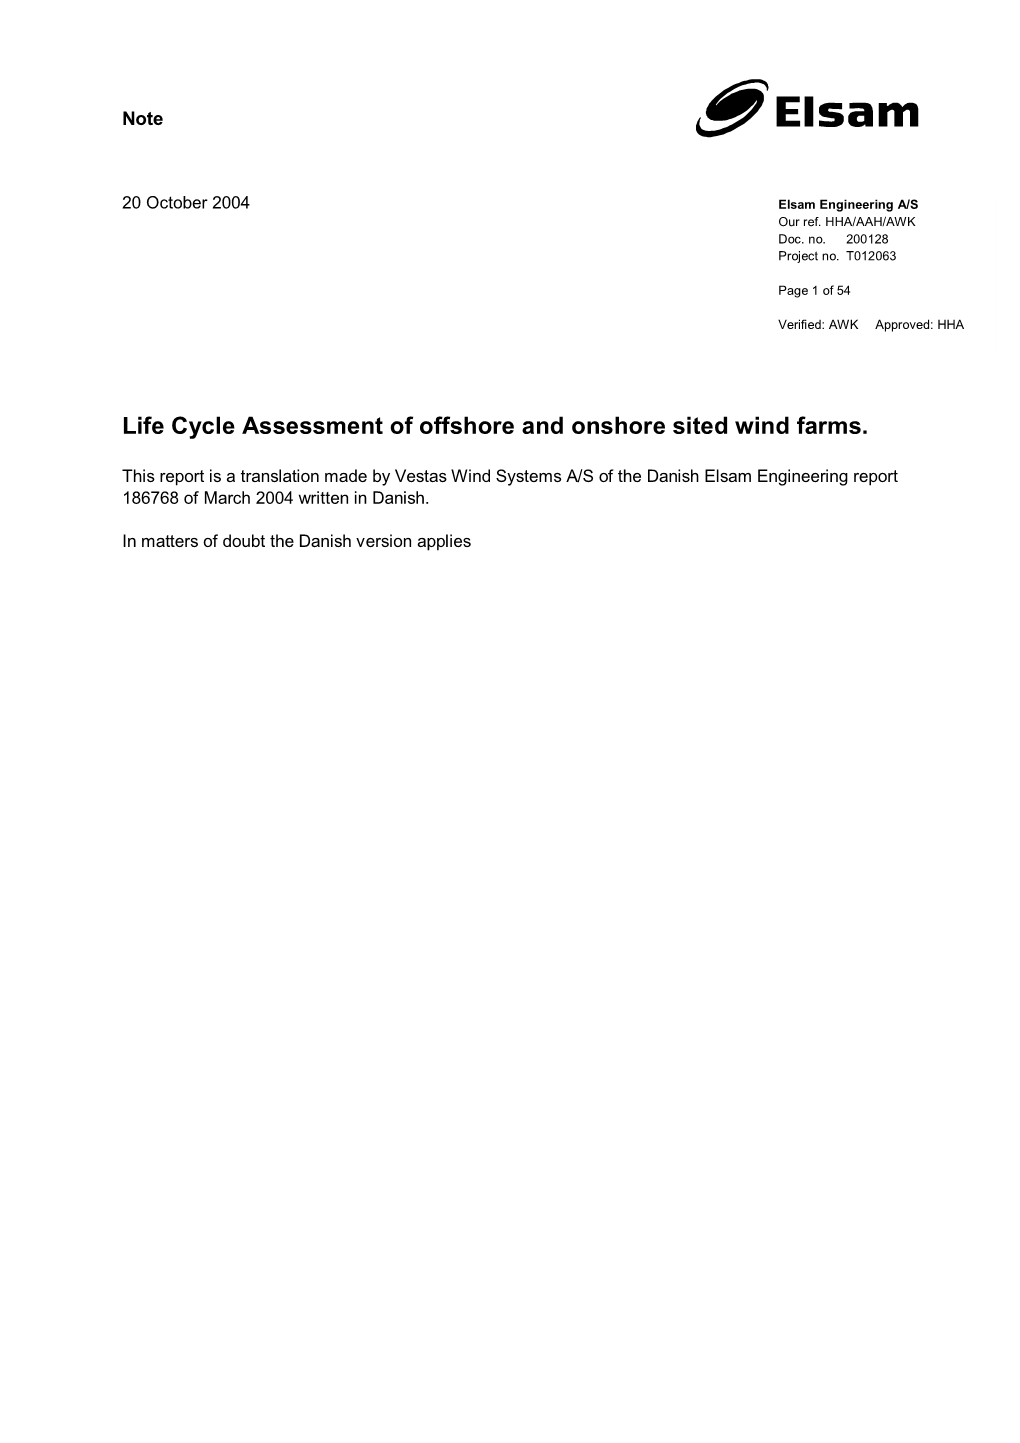 Life Cycle Assessment of Offshore and Onshore Sited Wind Farms